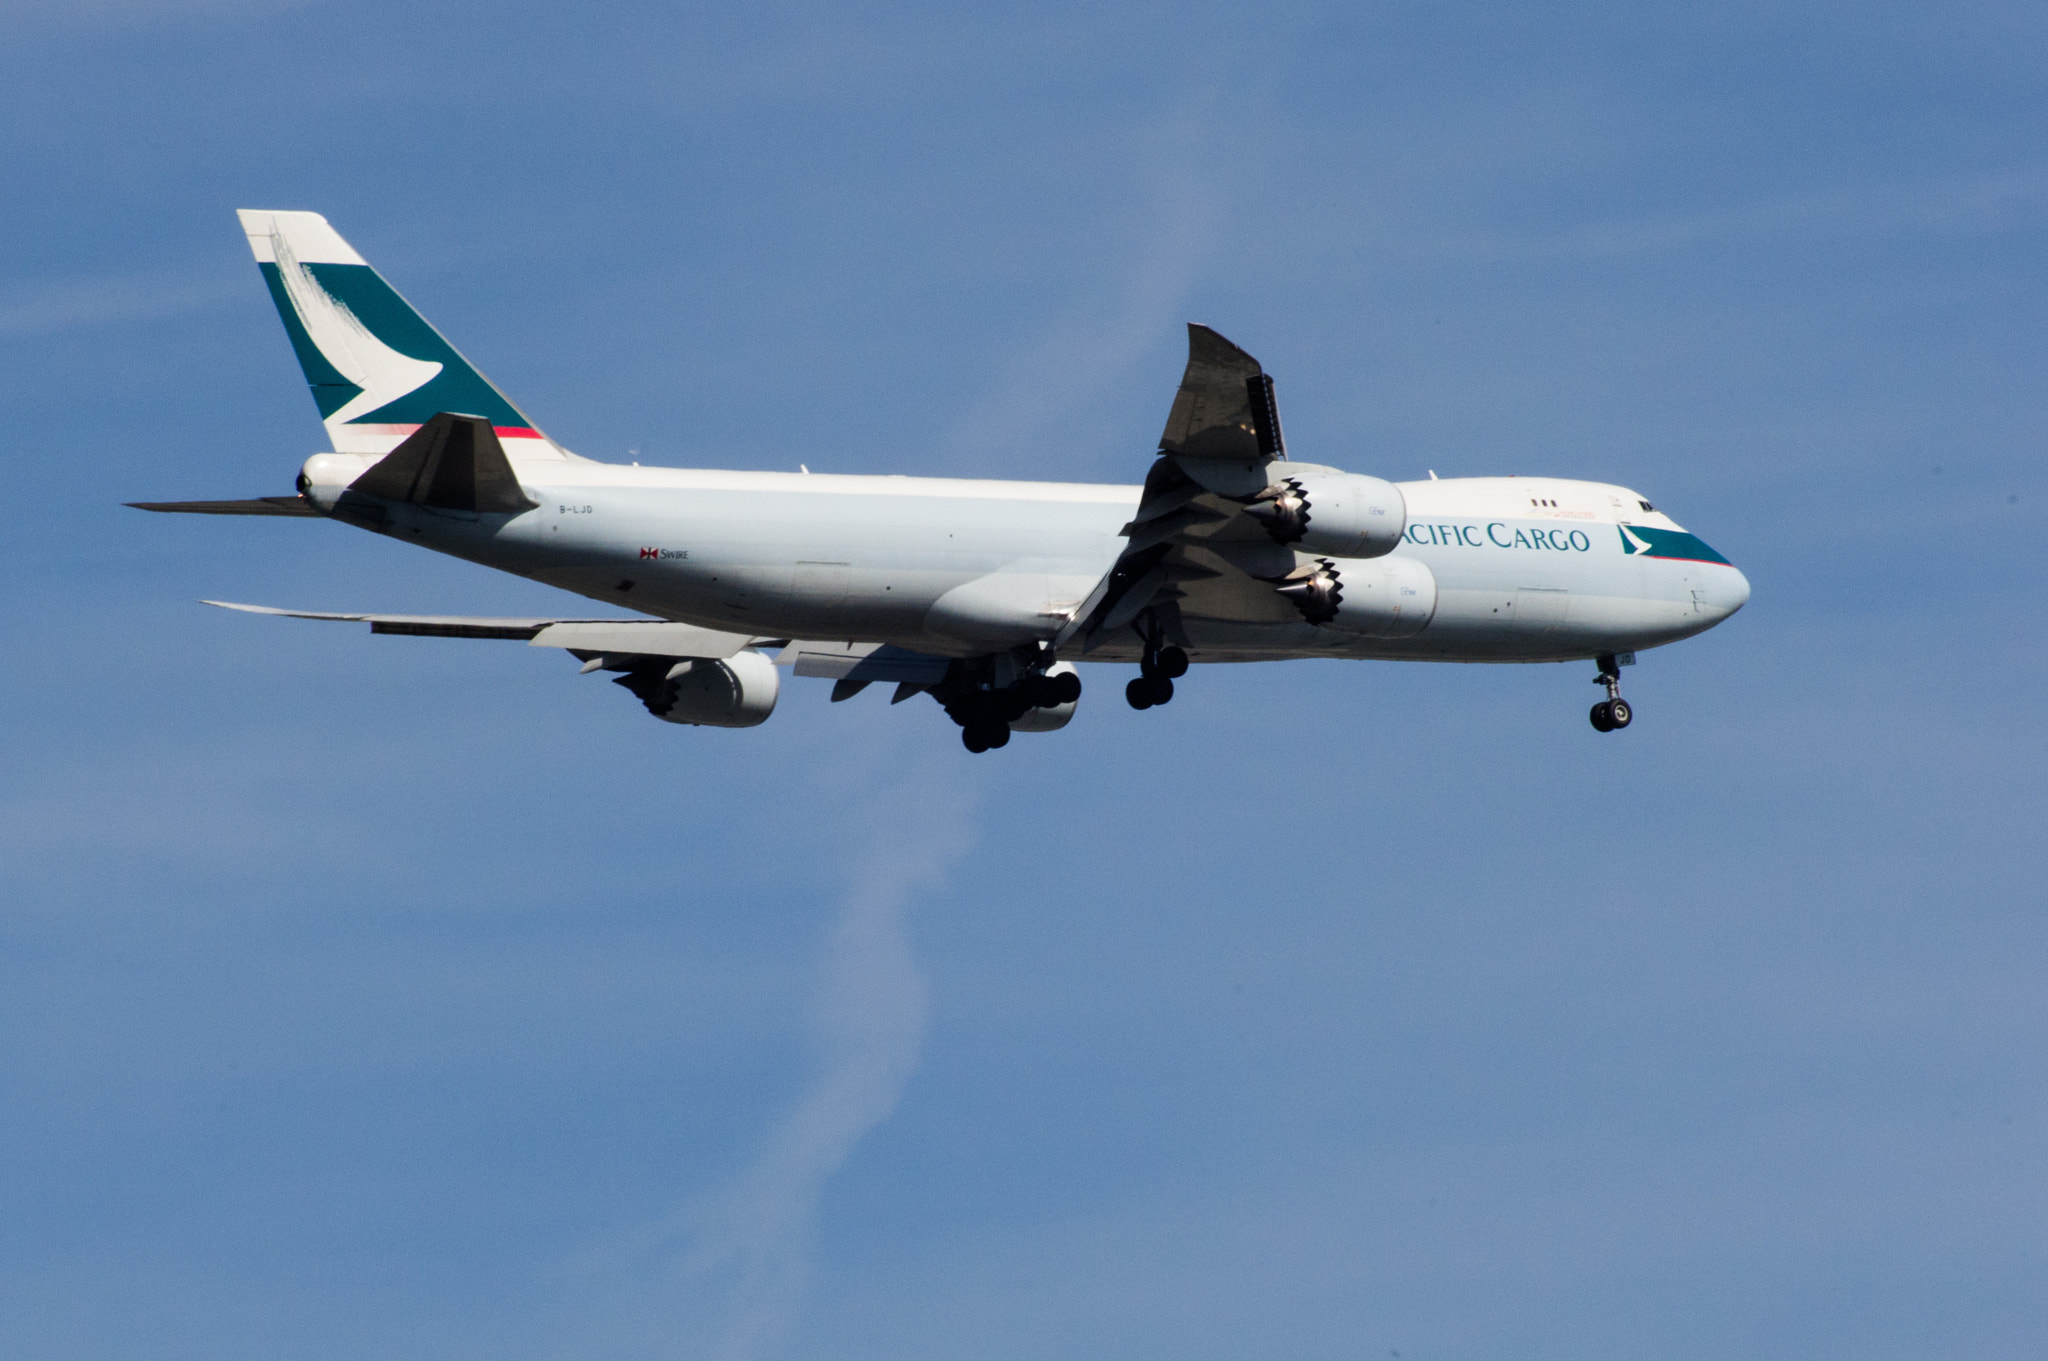 Pentax K-r + Sigma sample photo. Boeing 747-8f cathay pacific photography